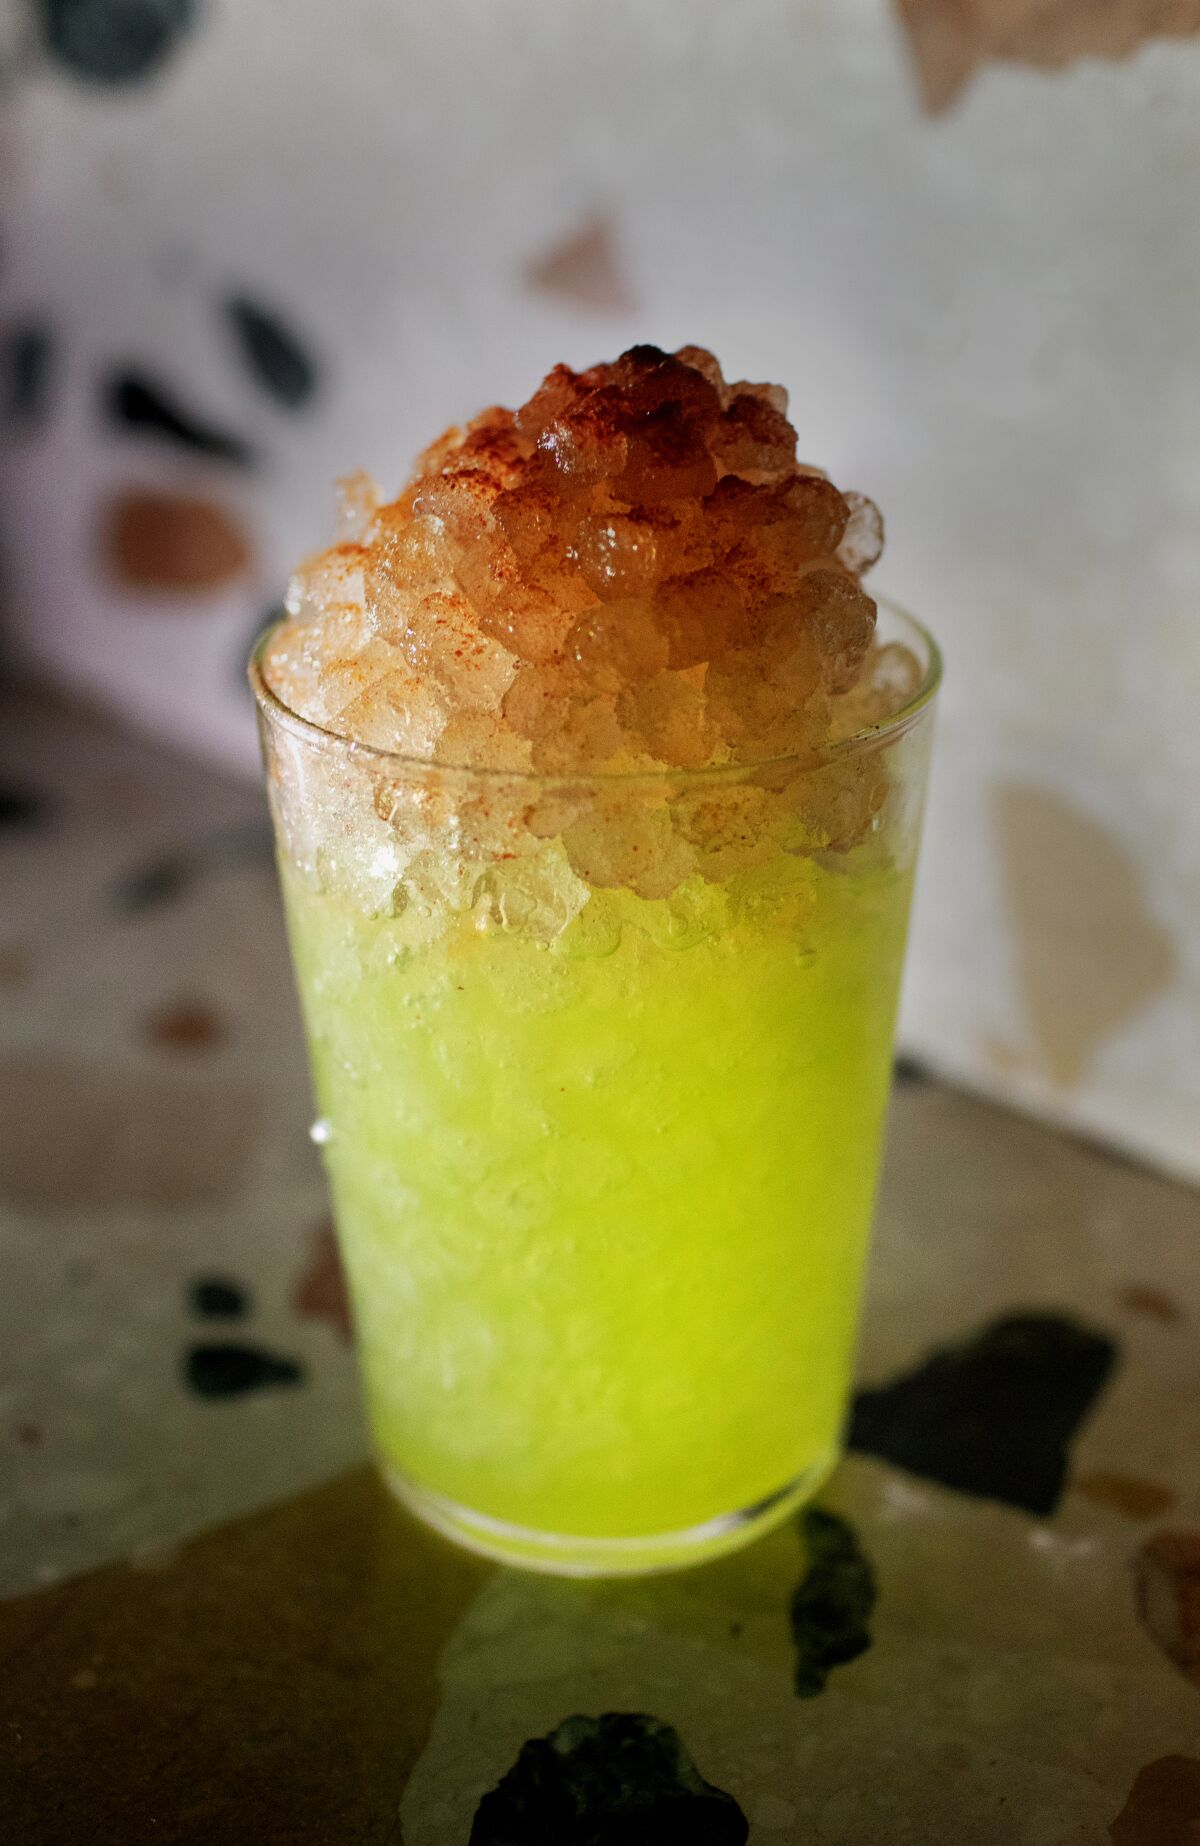 A neon-colored cocktail filled with crushed ice.